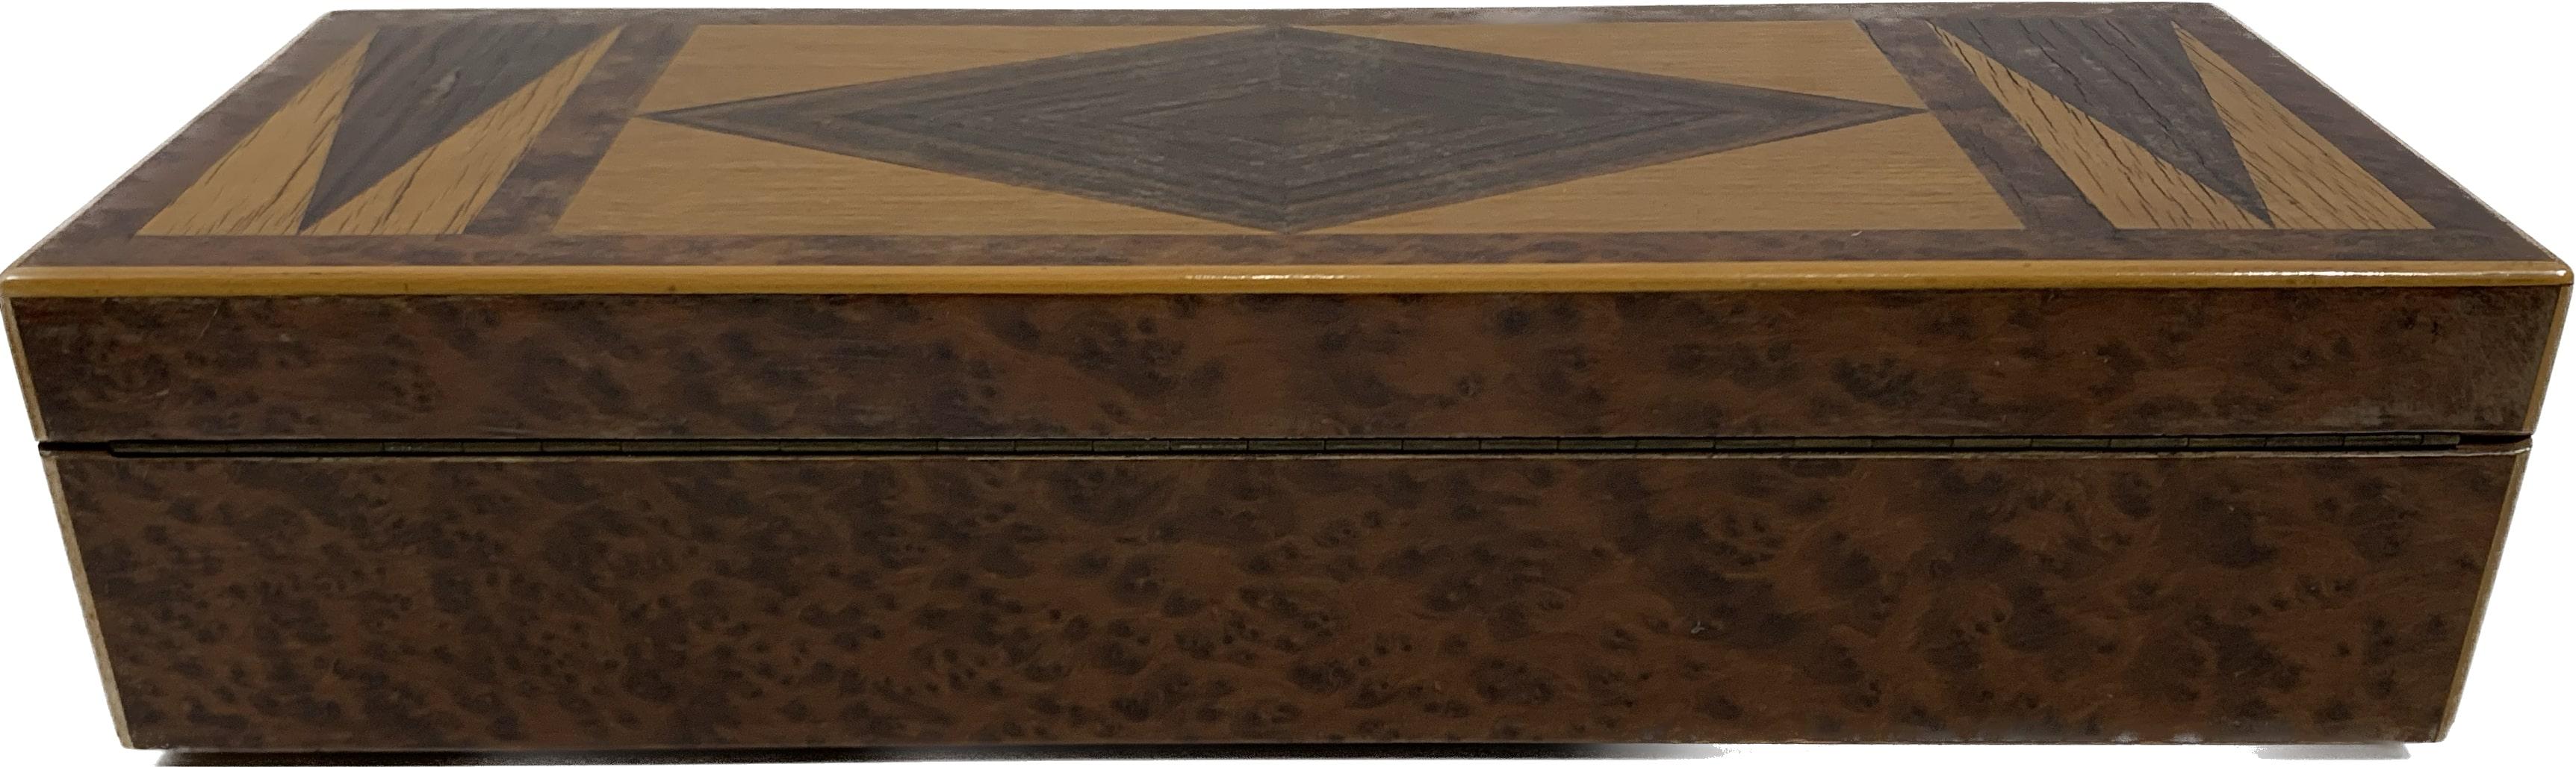 Marquetry Art Déco Decorative Wooden Box For Sale